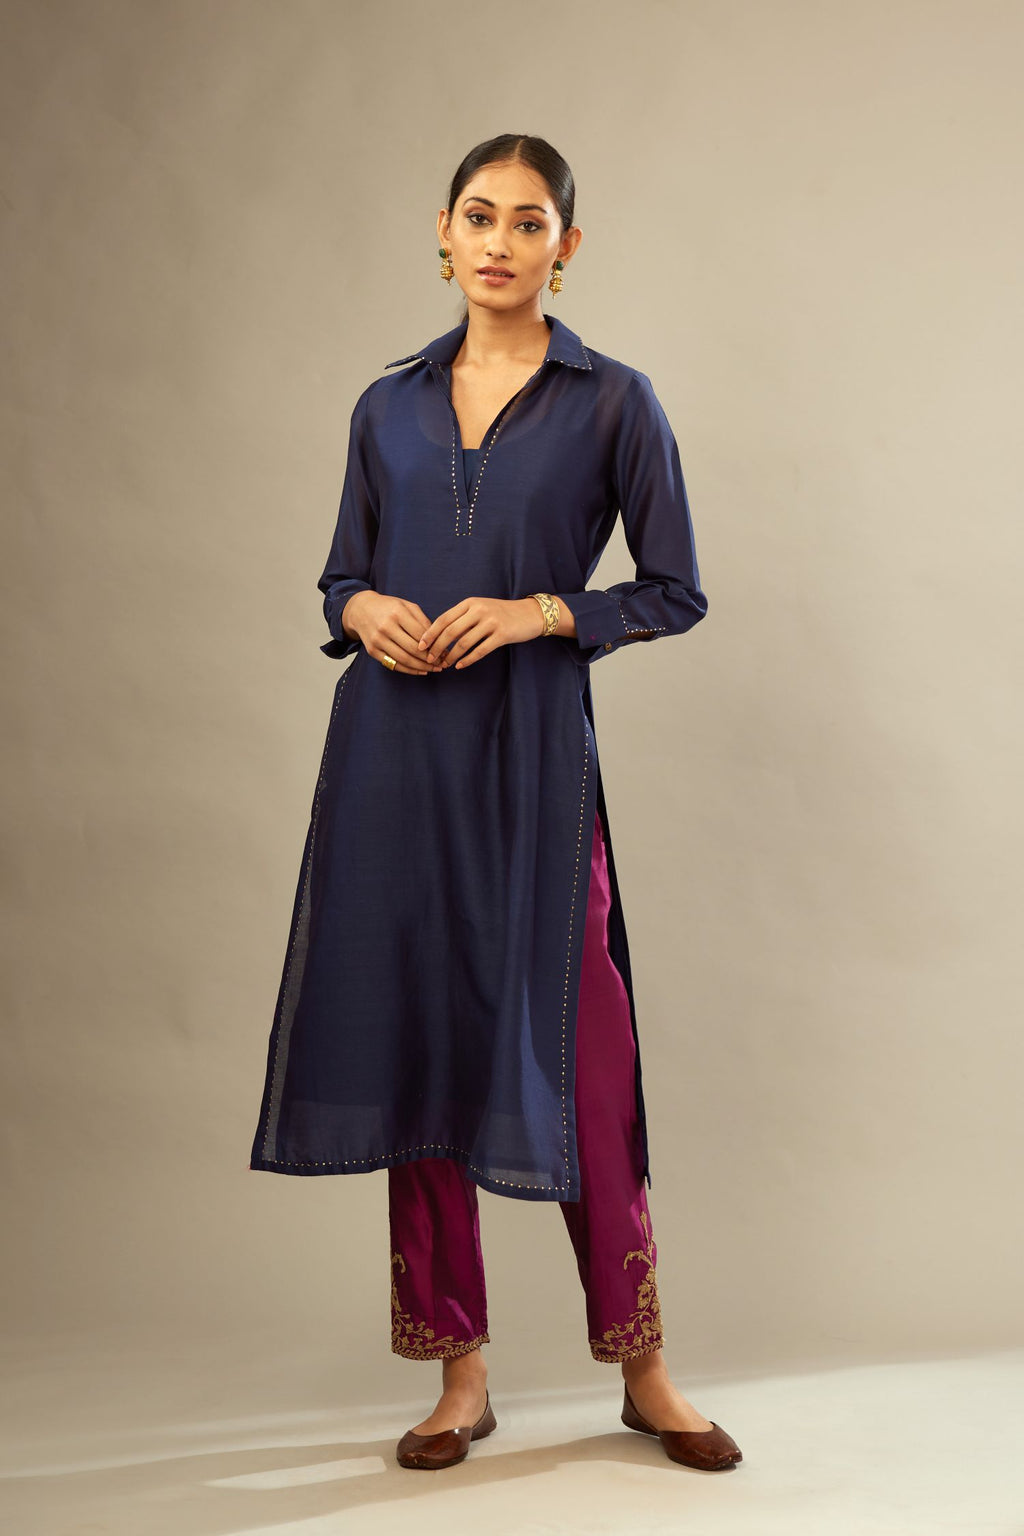 Navy blue silk chanderi kurta set with a shirt collar neckline and full sleeves, detailed with gold sequin work.